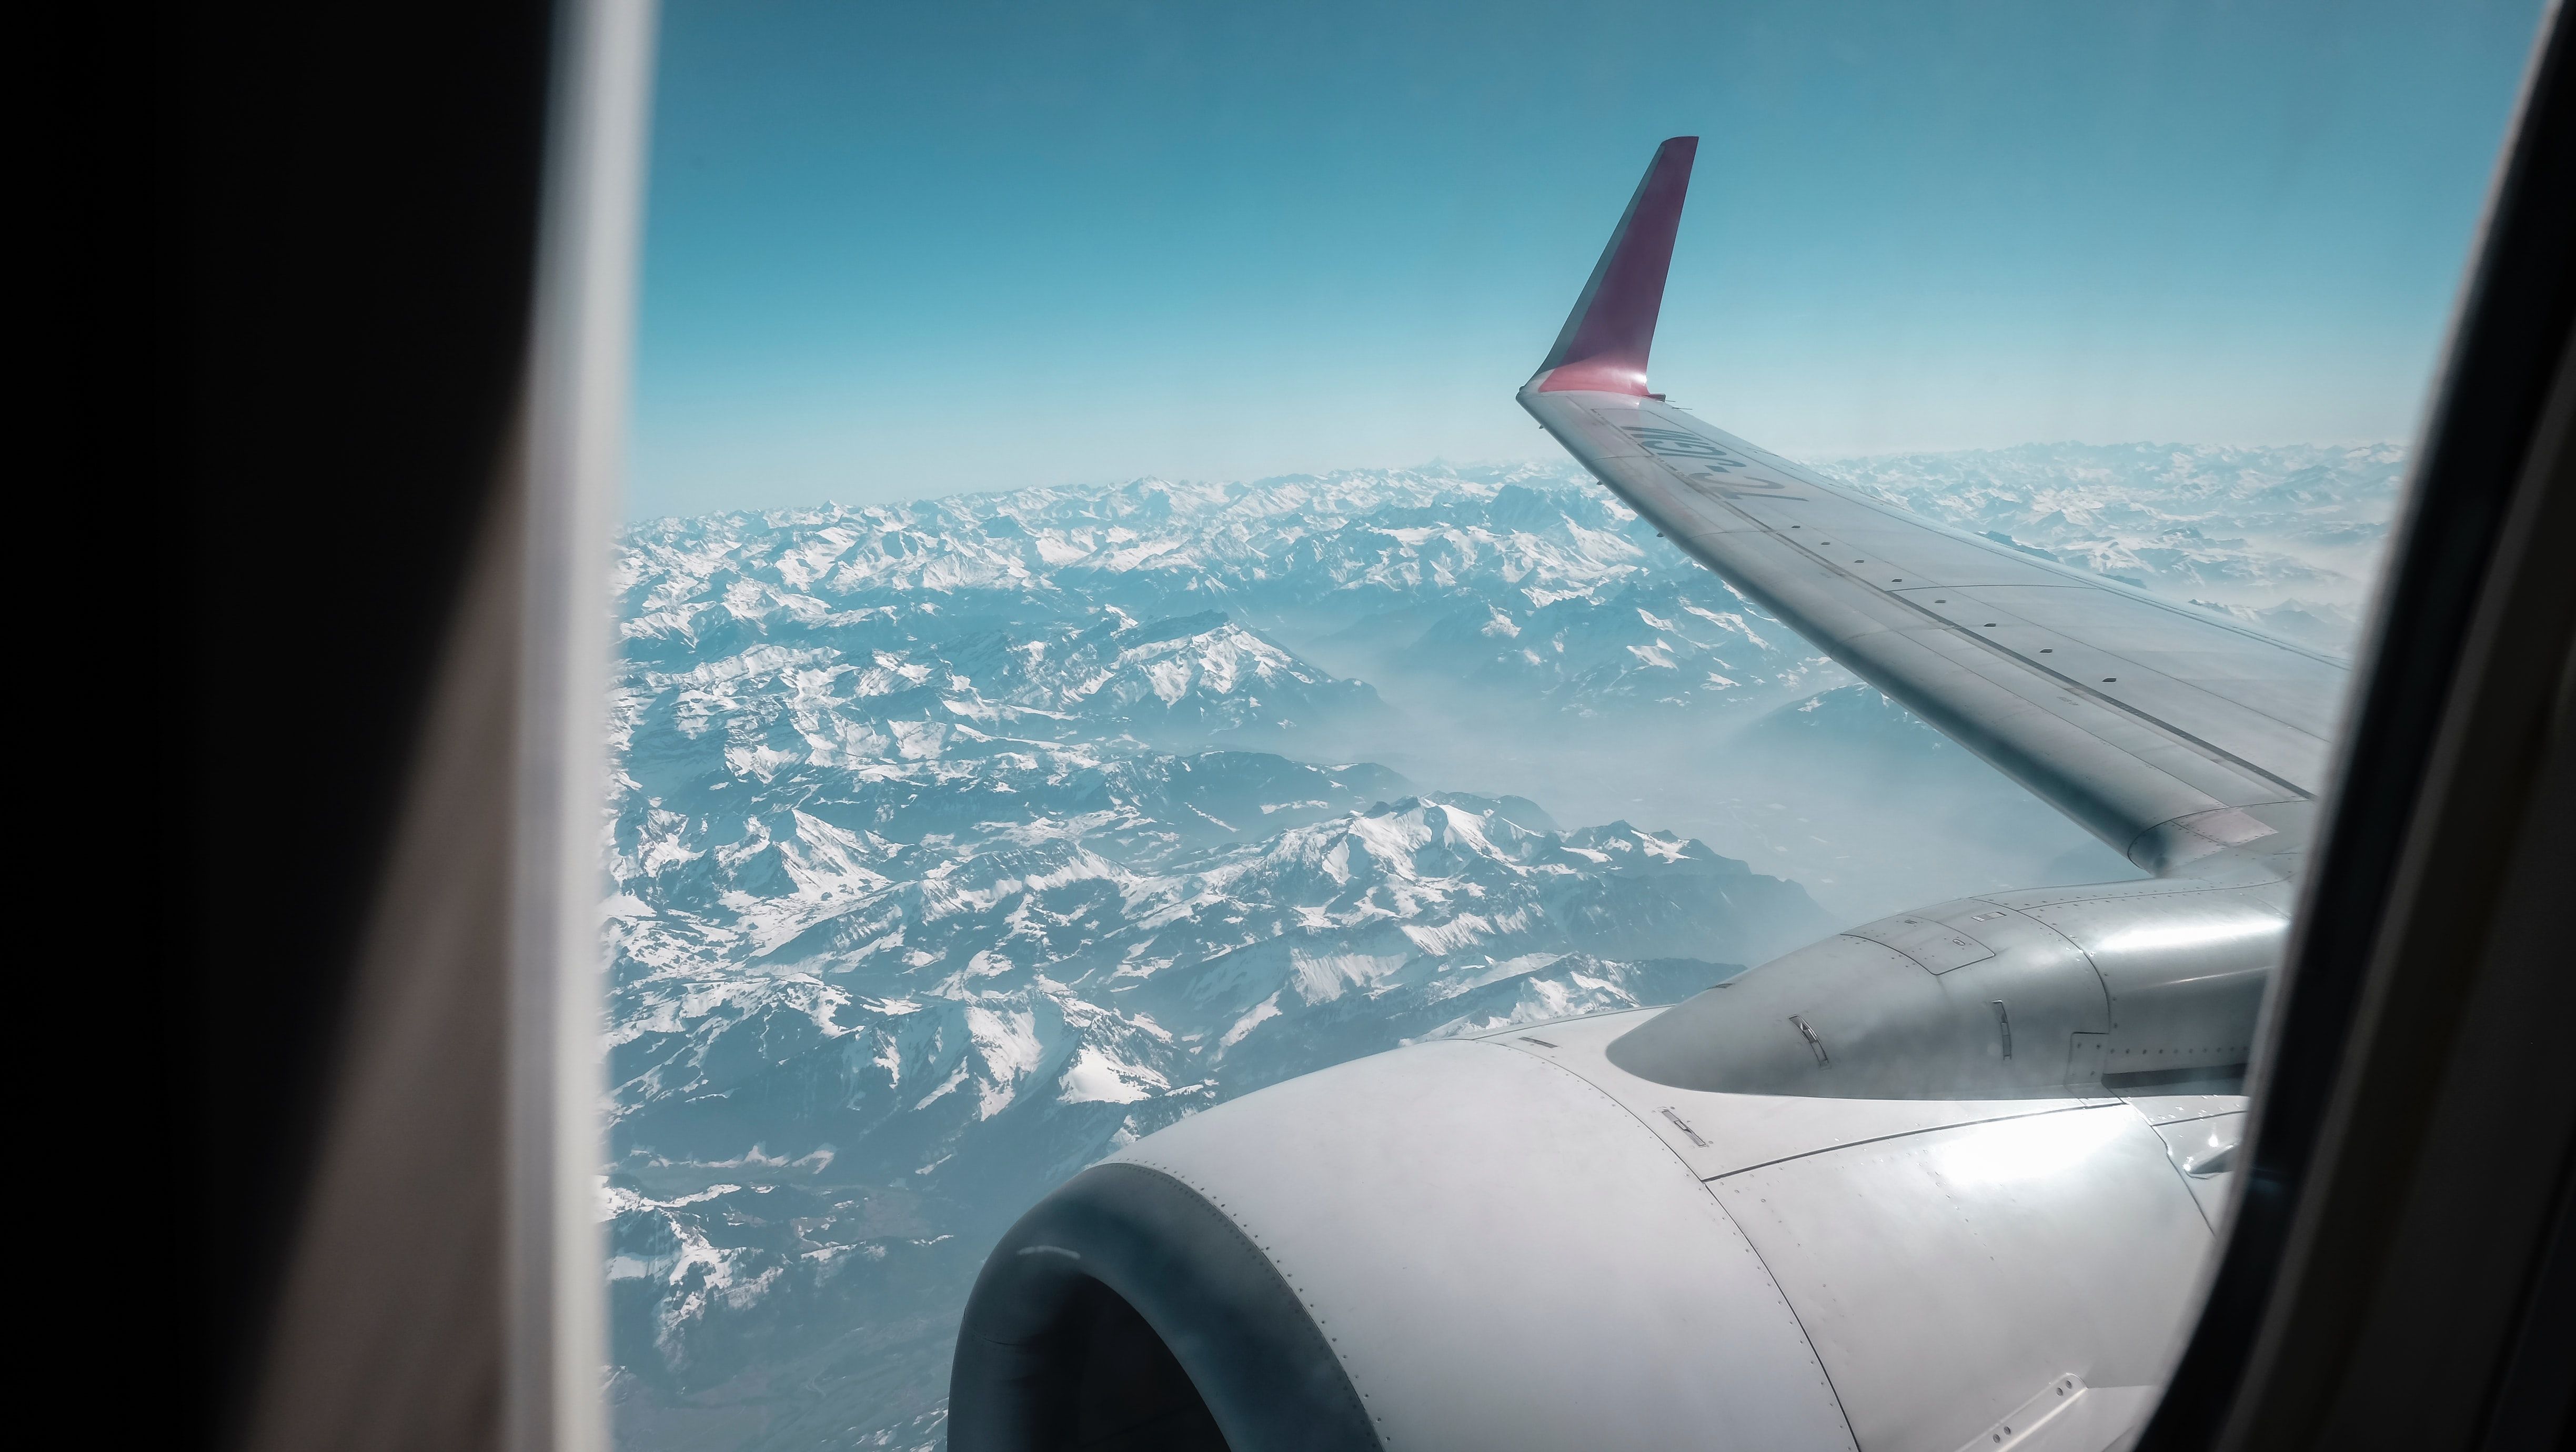 A view of the mountains in the Alps, Switzerland from a window of a plane